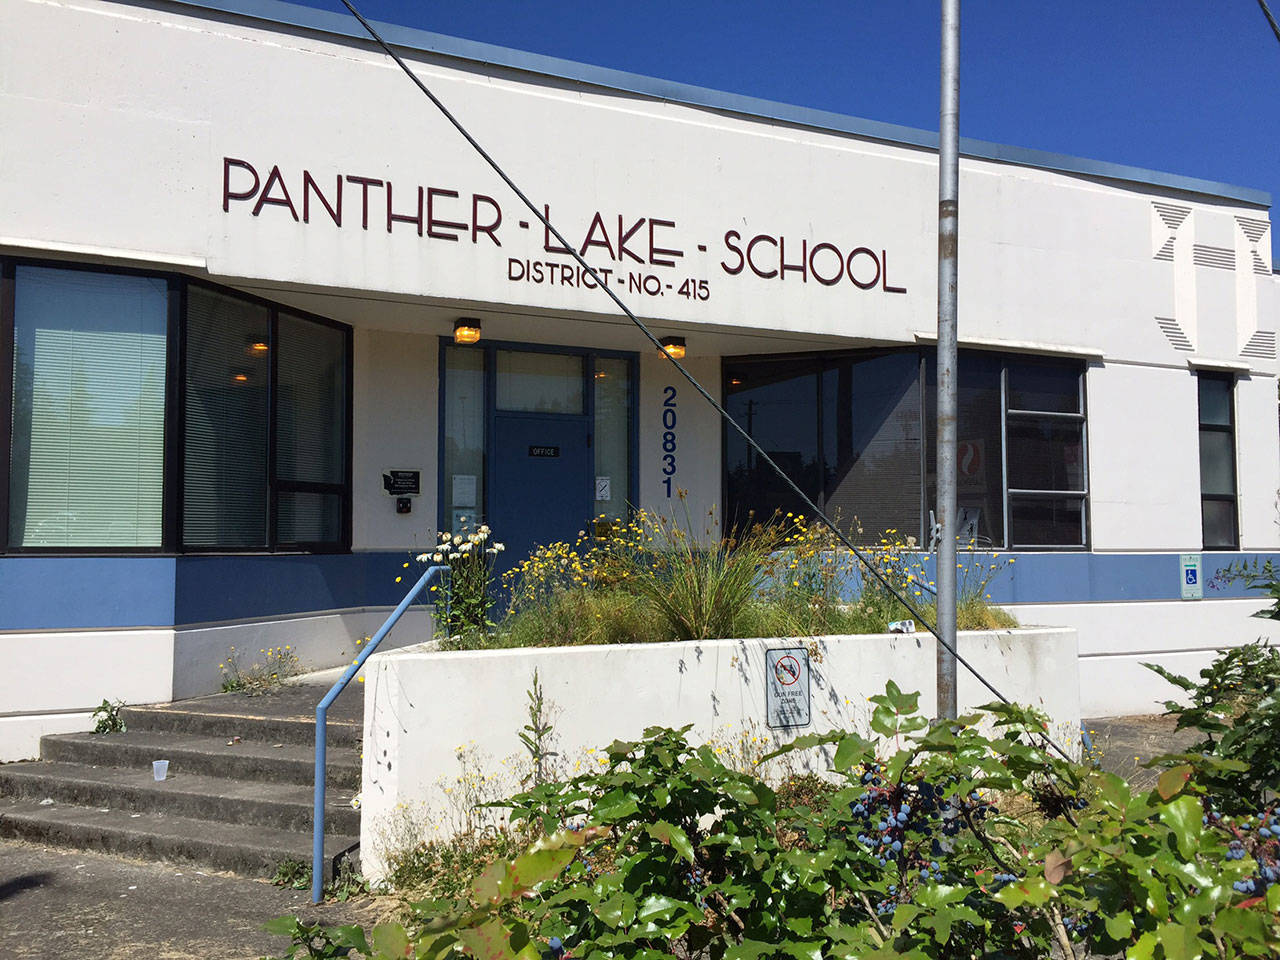 The original Panther Lake Elementary School building as it stands today. COURTESY PHOTO